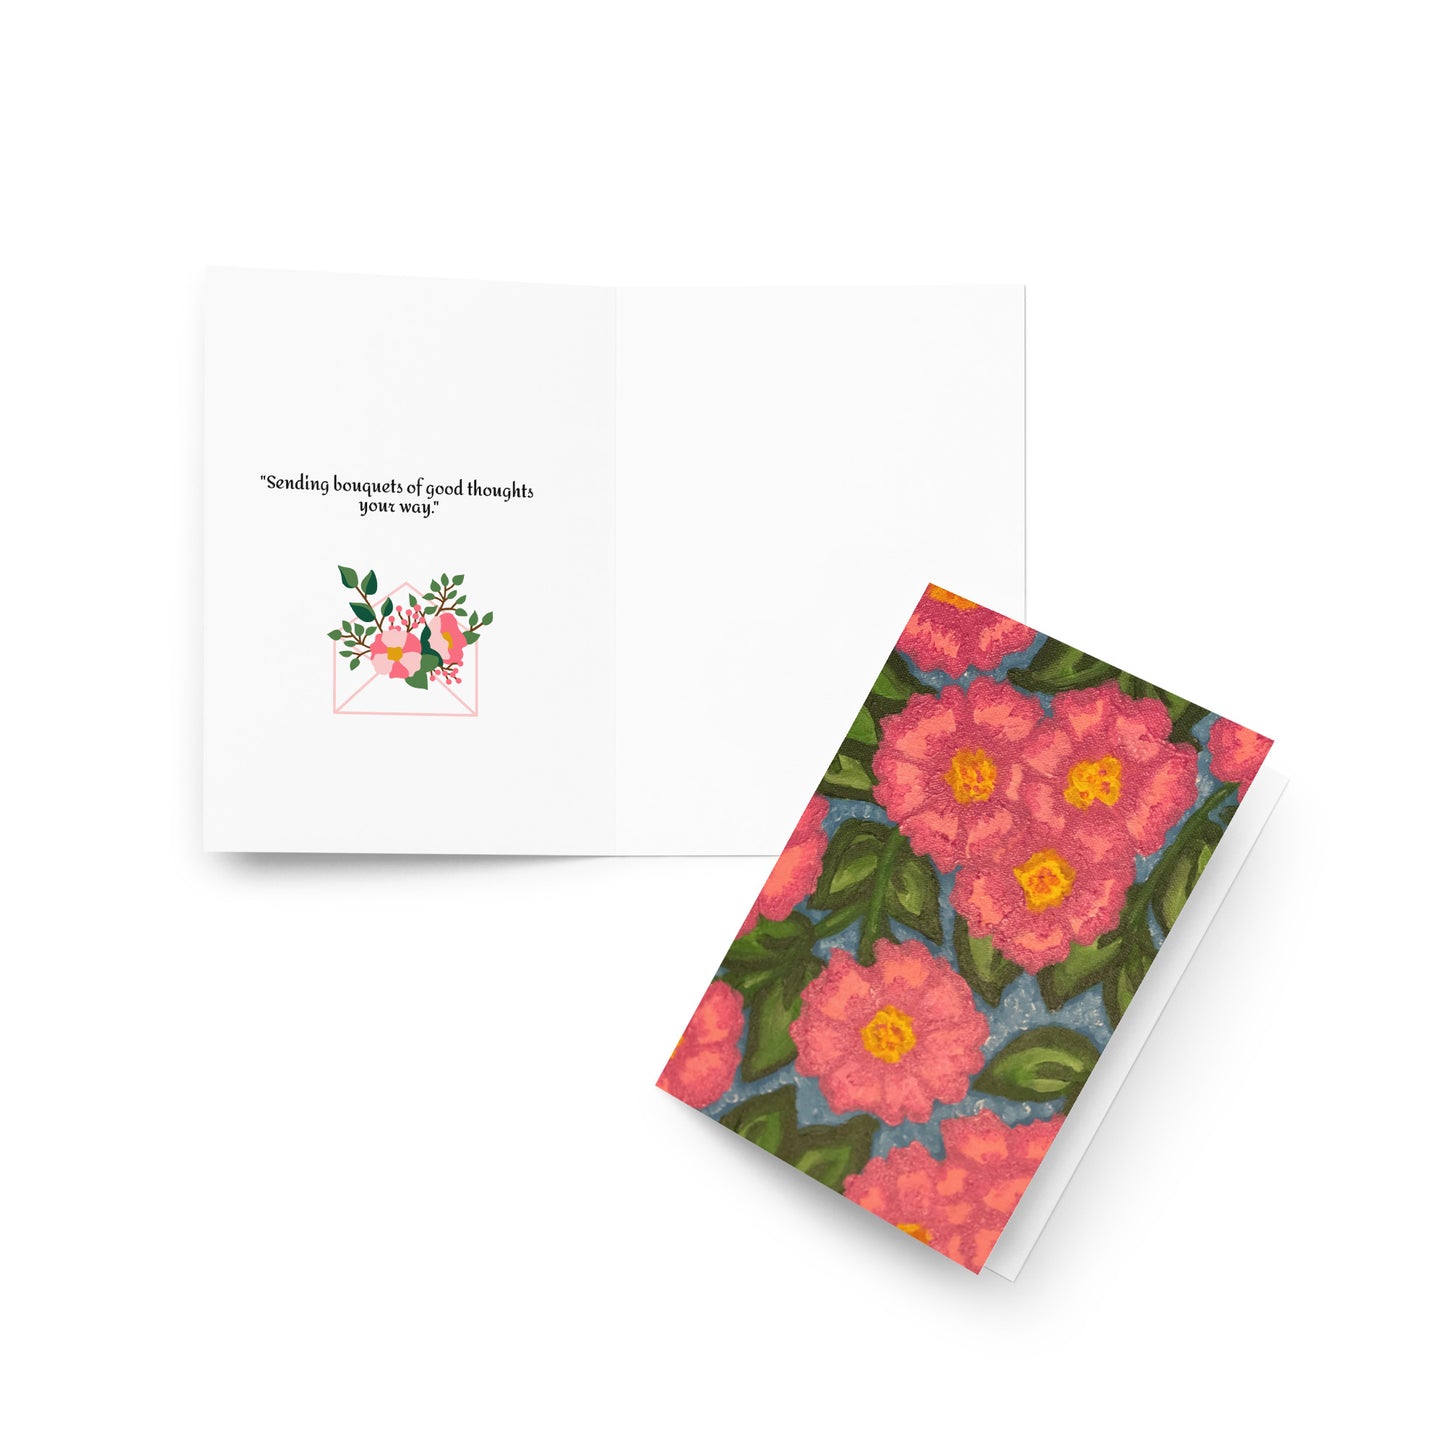 Sending bouquets by Irma Greeting card